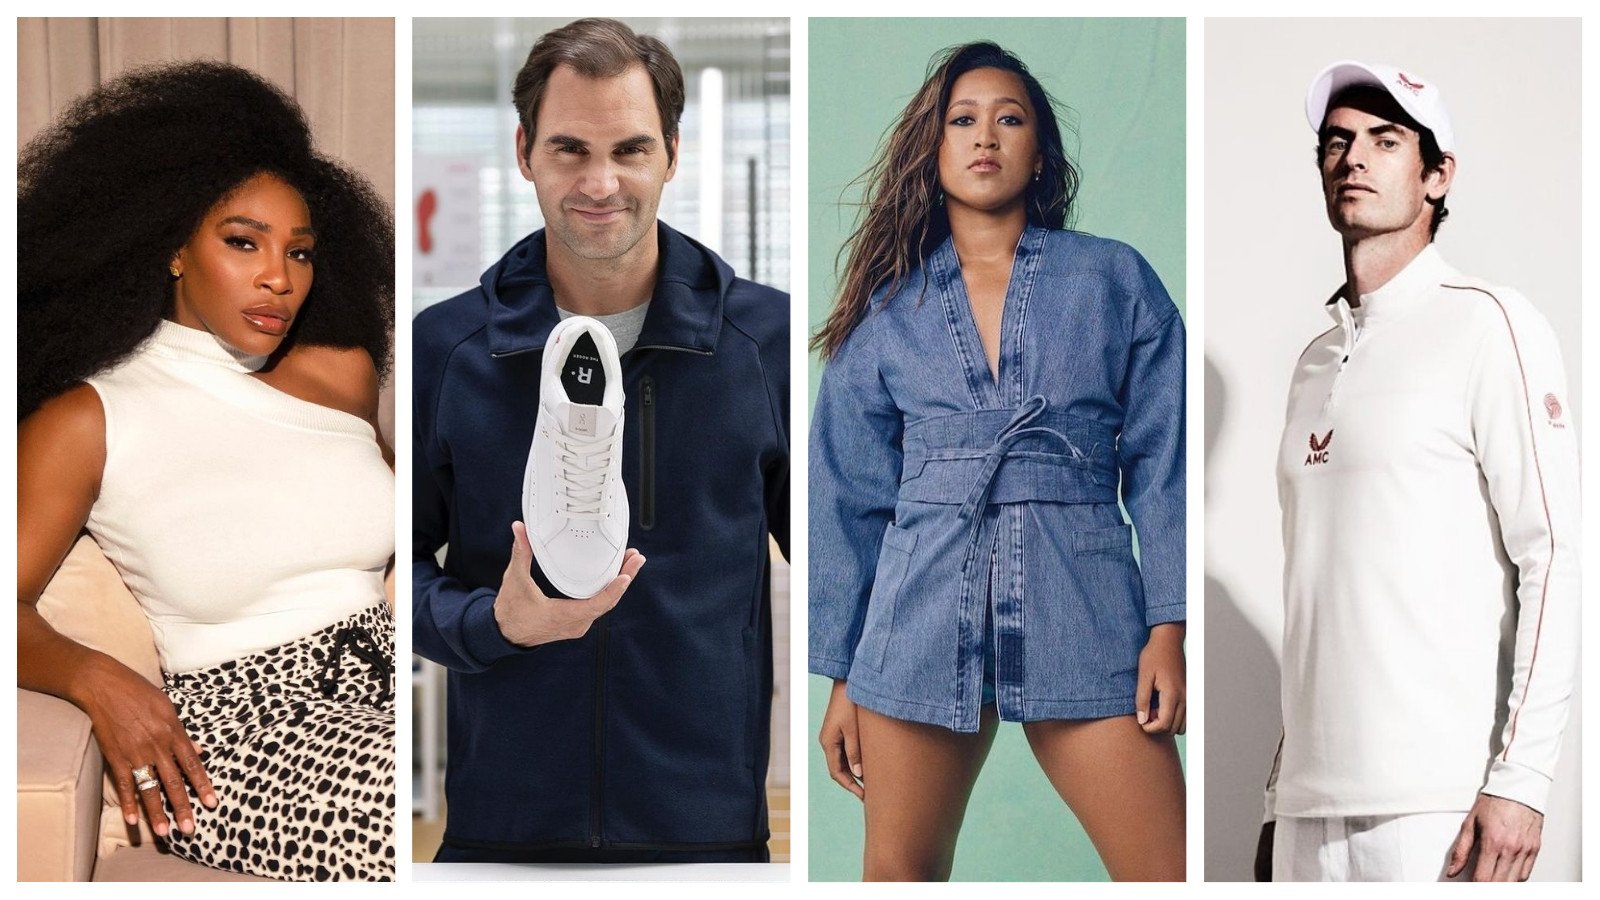 Which of the world’s top tennis players have their own fashion brands? From left, Serena Williams, Roger Federer, Naomi Osaka and Andy Murray. Photos: @serena, @rogerfederer, @naomiosaka, @castore_sportwear/Instagram